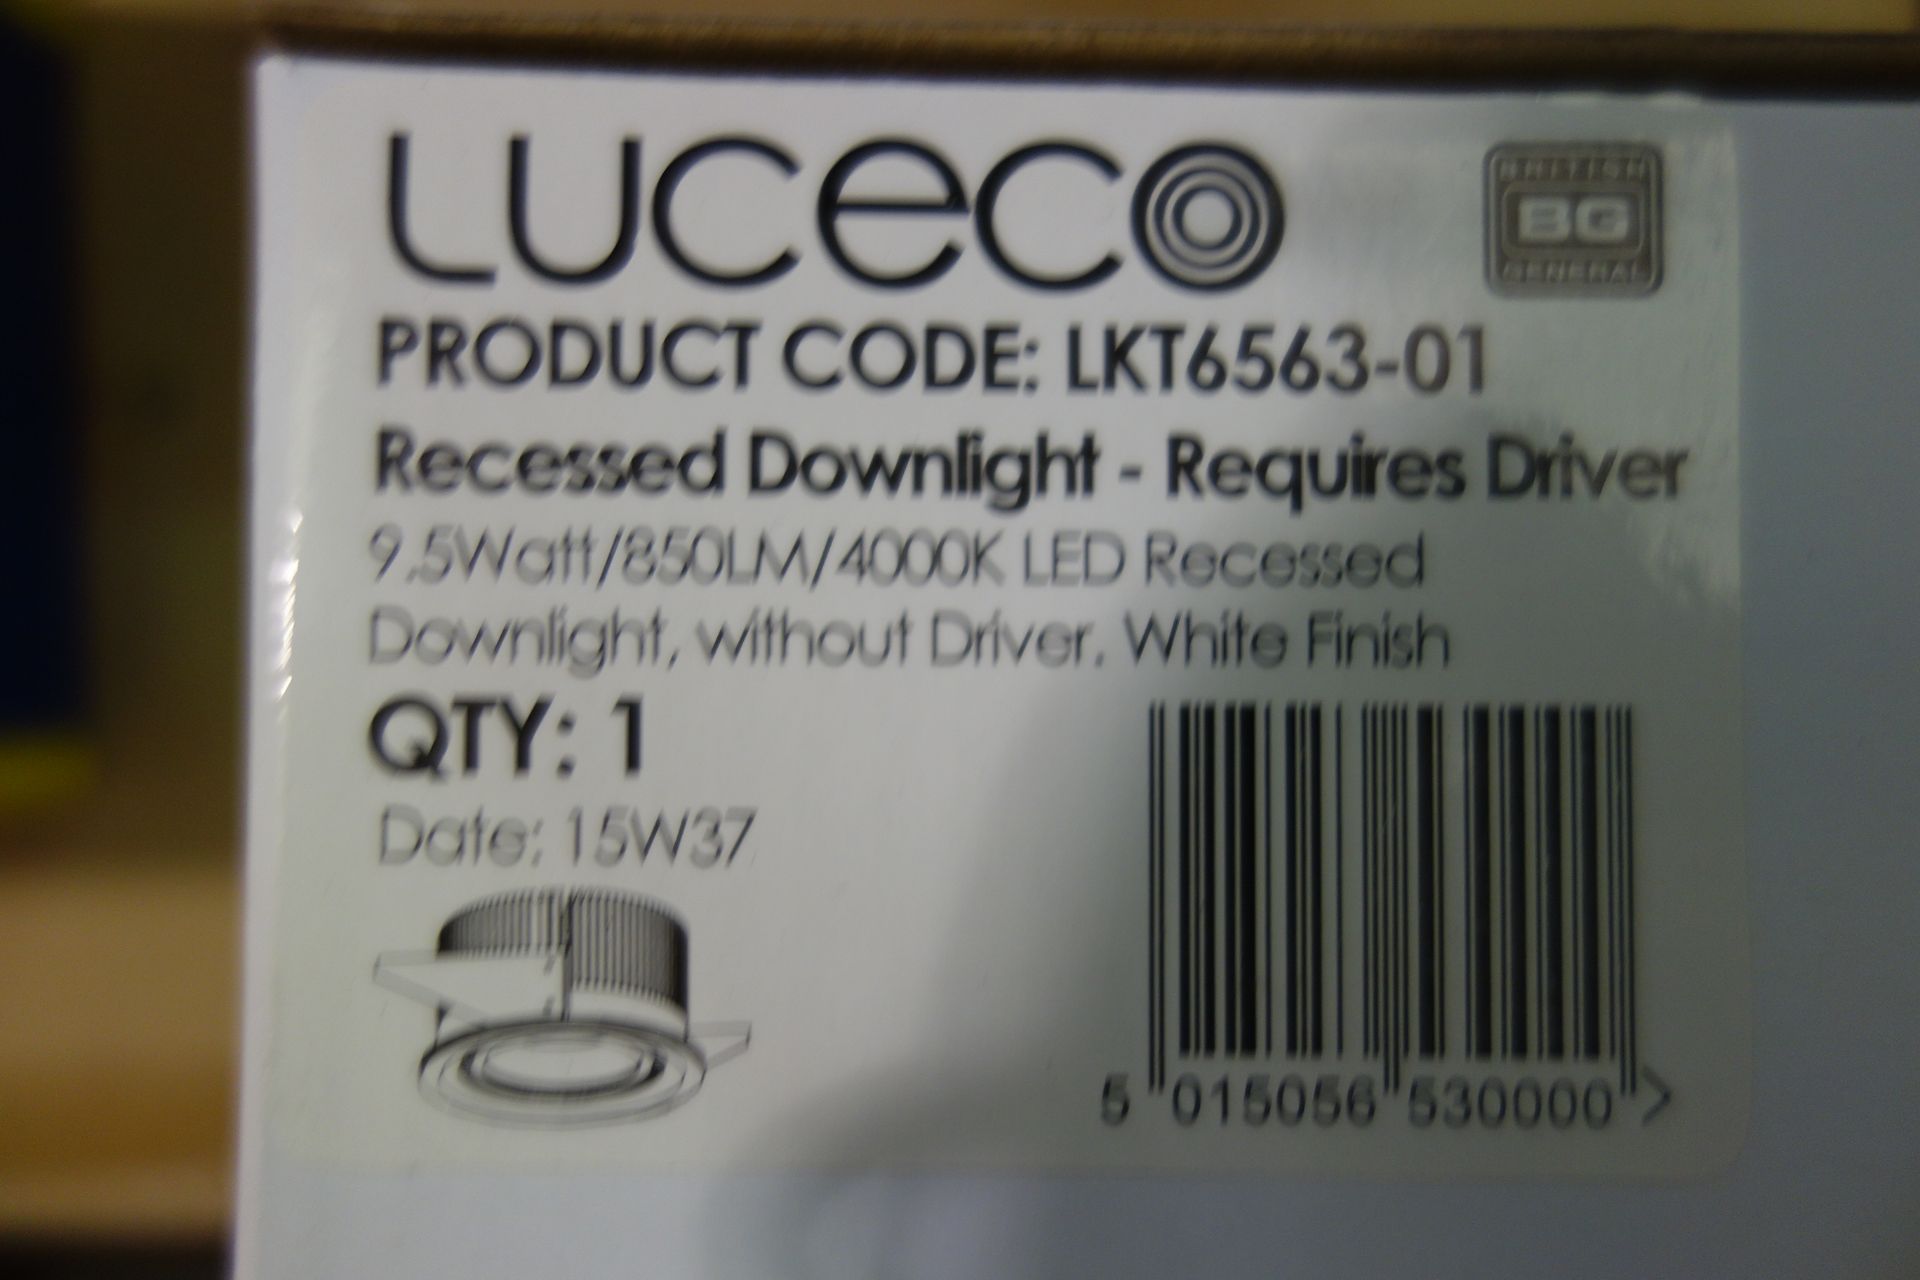 12 X Luceco LKT6563-01 Recessed Downlight 9.5W 850LM 4000K LED White Finish Required Driver